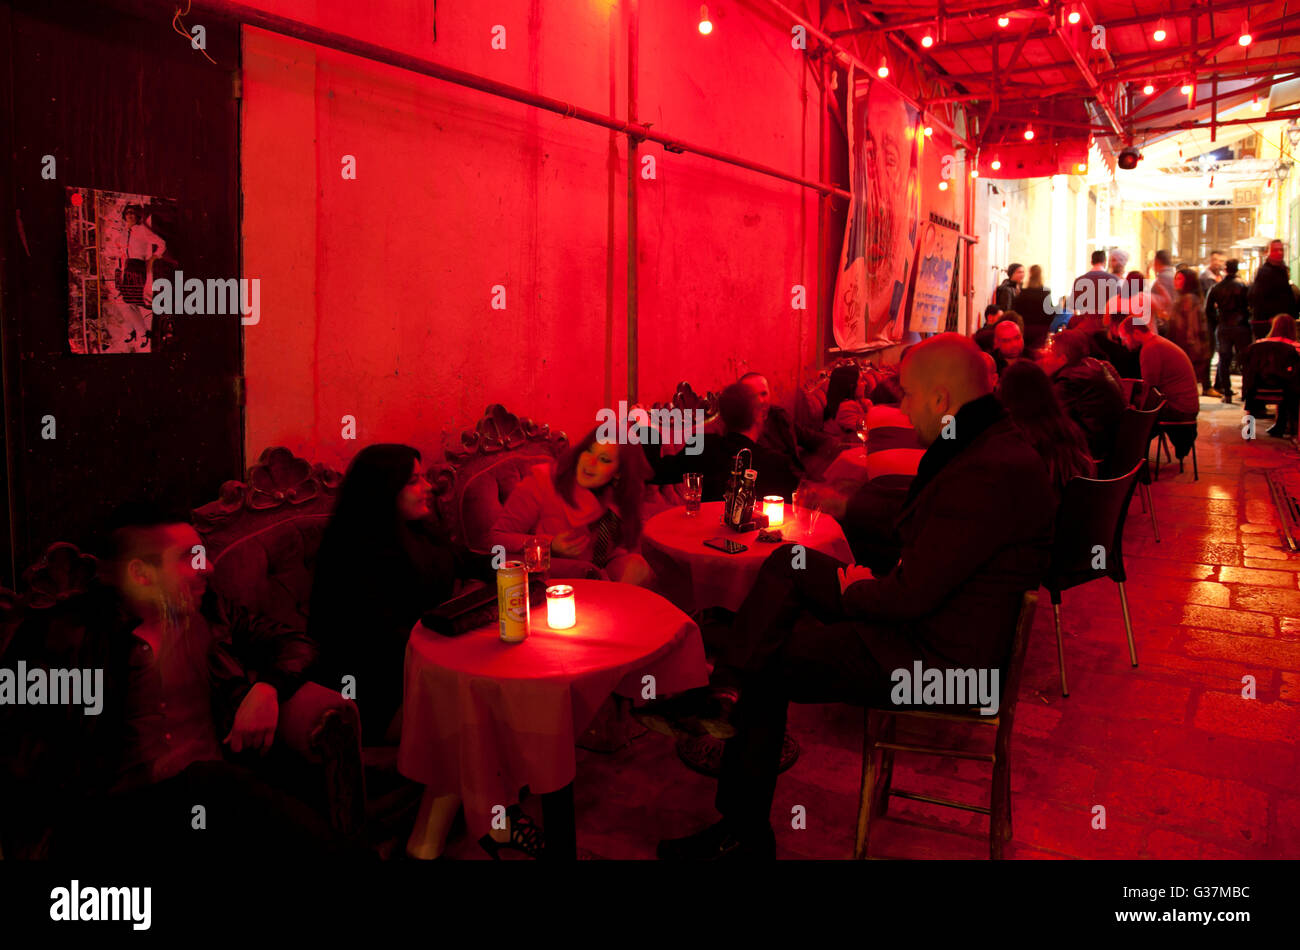 Retro decor and red lighting evoke the history of debauchery in Strait Street which used to be Malta's red light district. Stock Photo